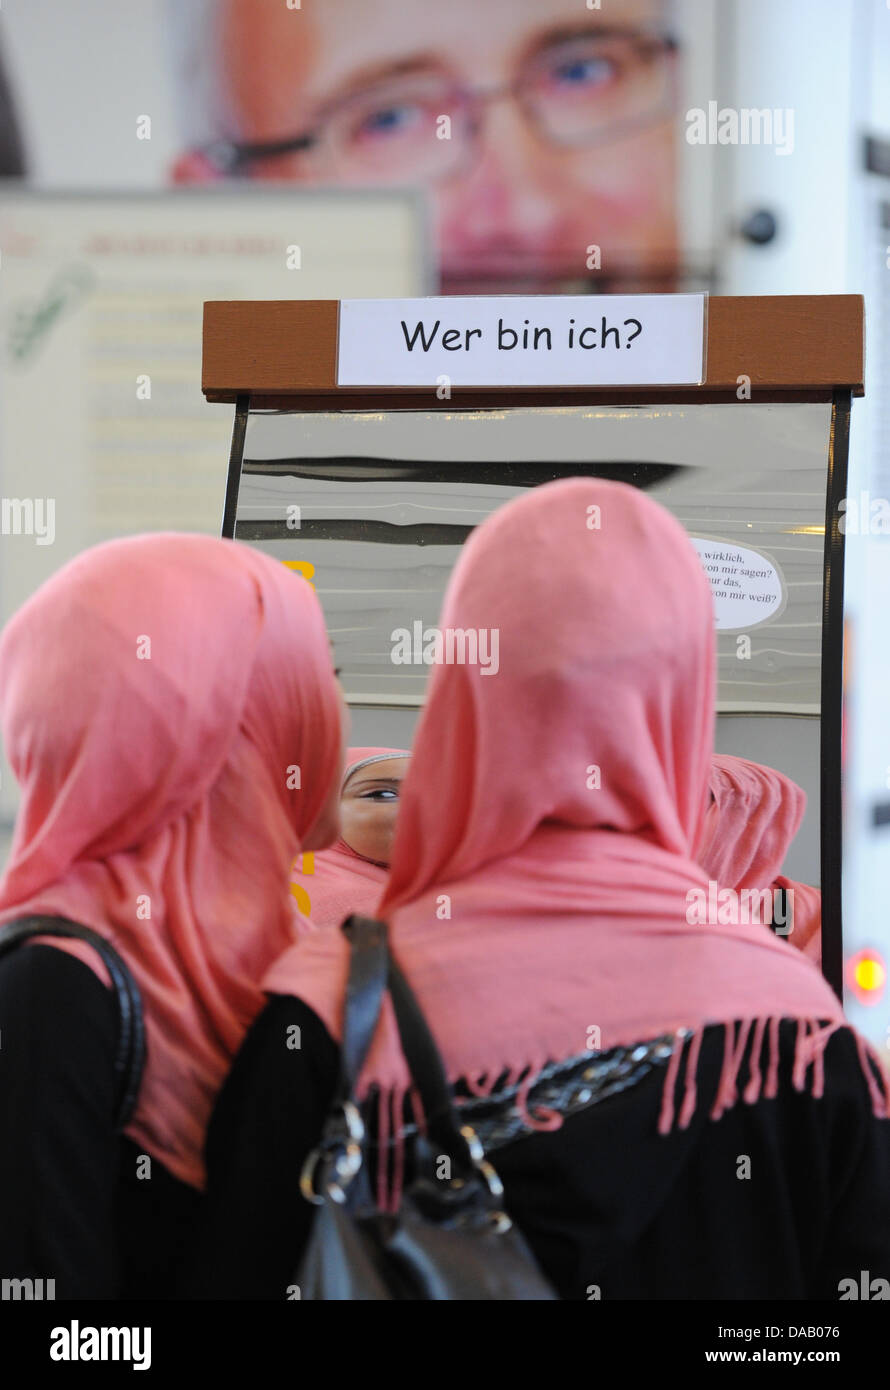 Young muslim women with headscarfs visit Europe's largest youth fair YOU 2011 in Berlin, Germany, 23 September 2011. YOU 2011 takes place from 23 until 25 September 2011. The fair presents 40 000 square meteres with 280 exhibitors, 100 musicians and bands. Photo: JENS KALAENE Stock Photo